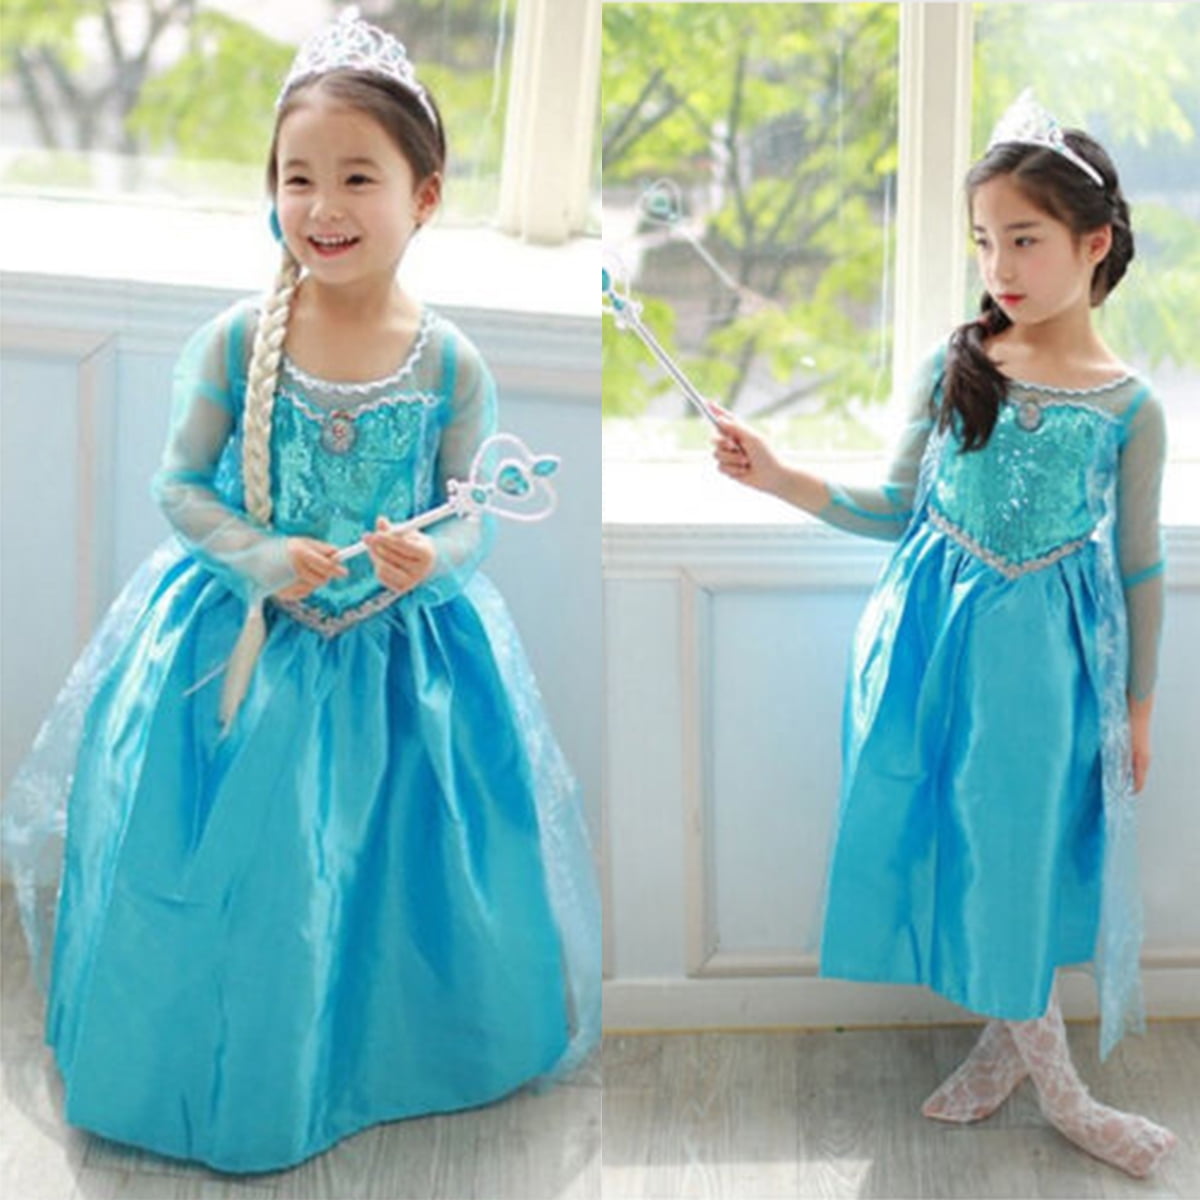 Yalla Baby Costume for Kids Girls Dress Toddler Princess 110150 CM 3 pcs  Set Dress Up Birthday Party Cosplay Outfits  Snow Queen  New Blue110cm  price in UAE  Amazon UAE  kanbkam